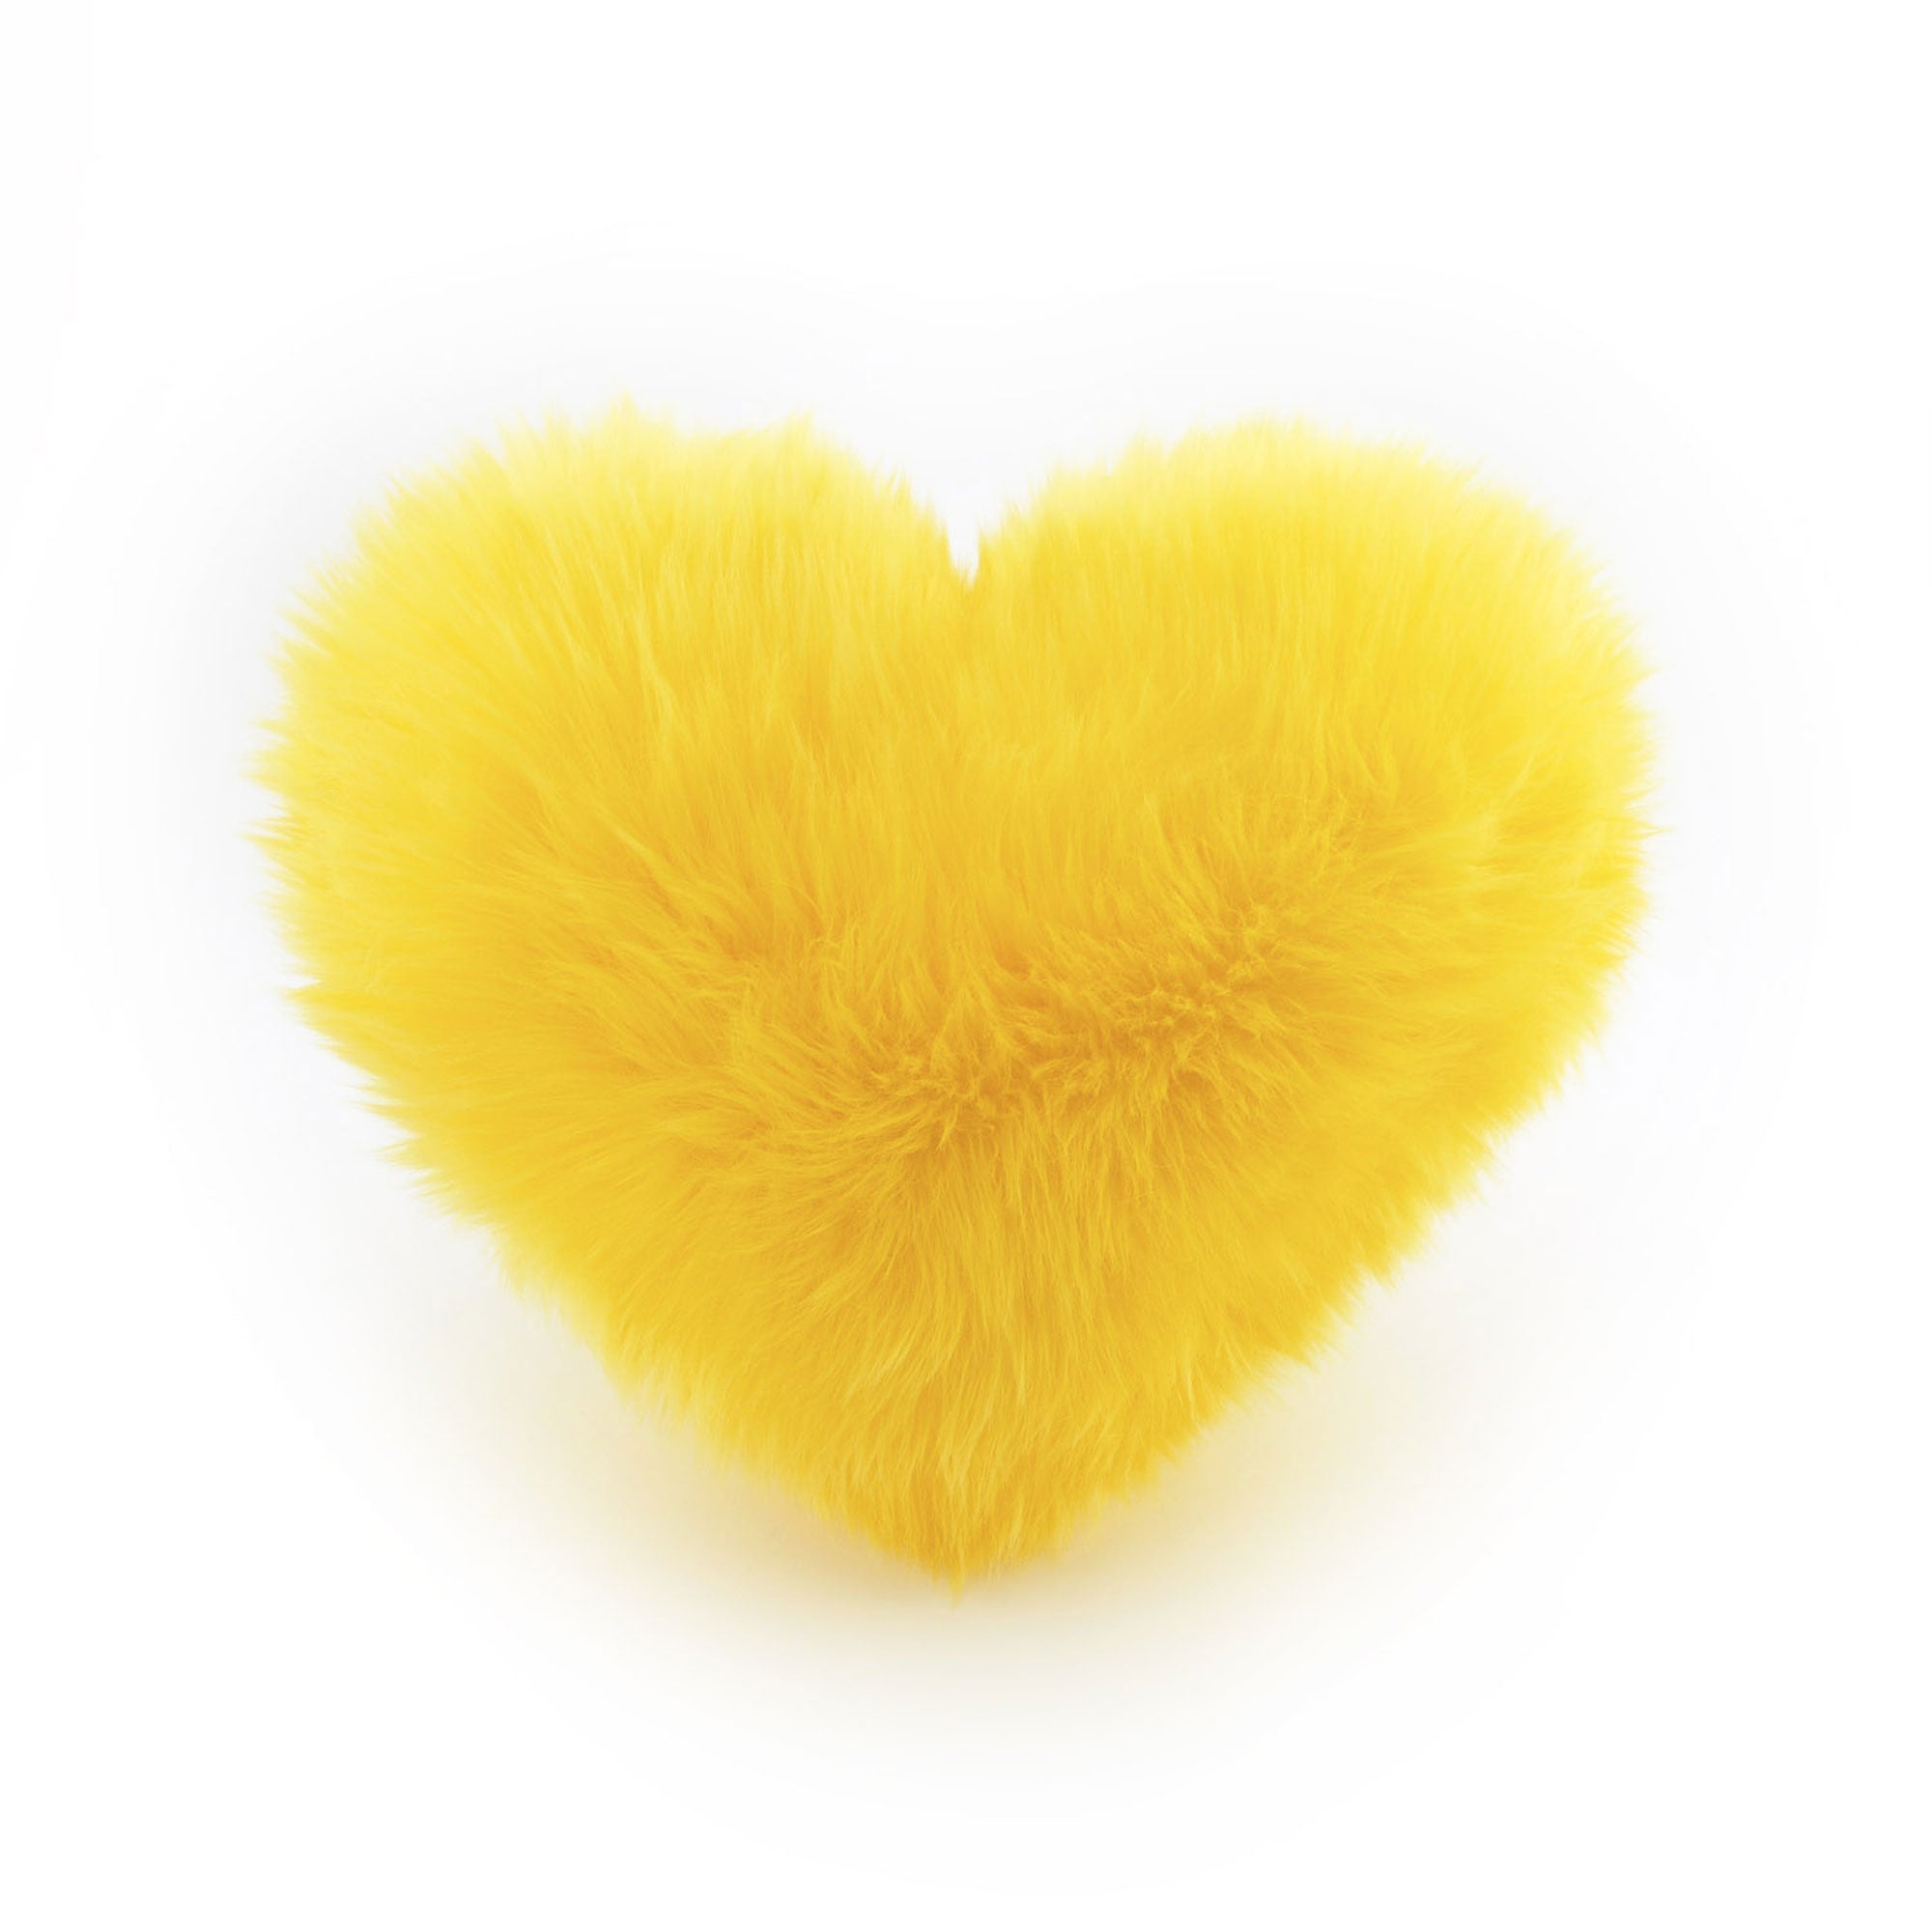 A bright Yellow faux fur heart shaped decorative pillow.